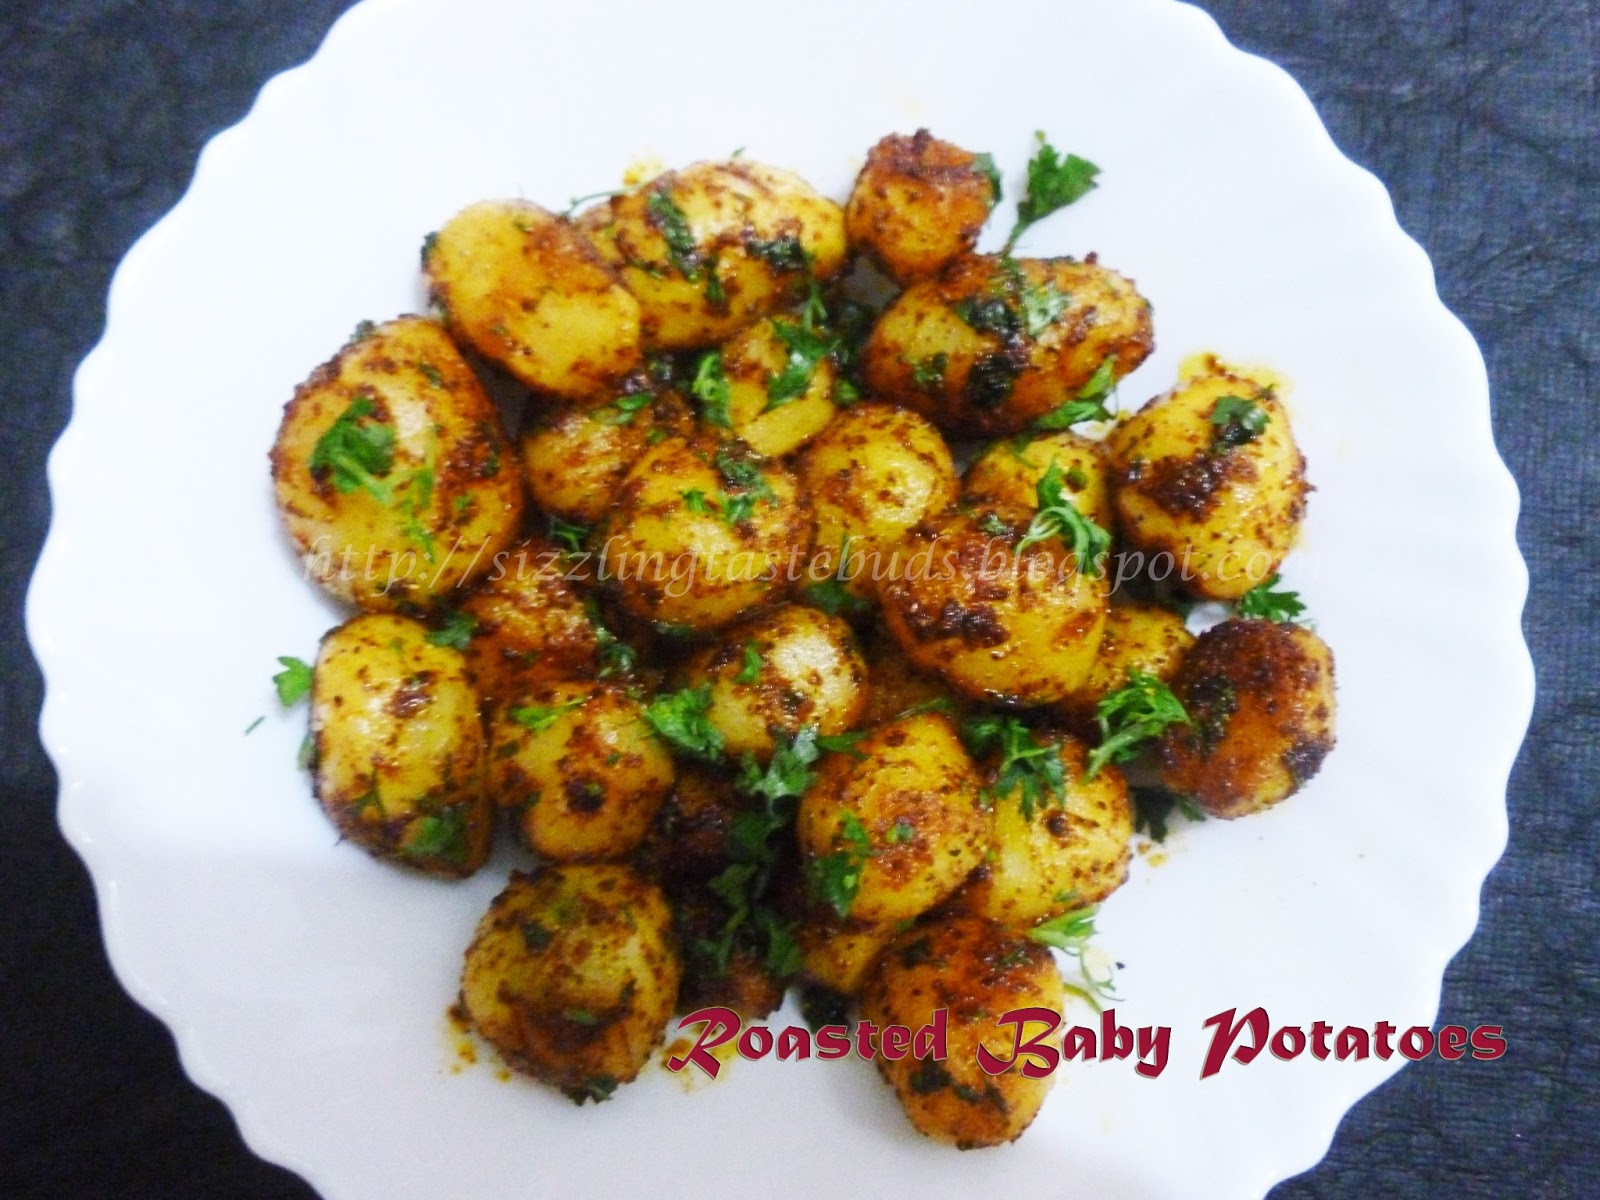 Roasted Baby Potatoes Recipes
 Home Made Recipes Roasted Baby Potatoes